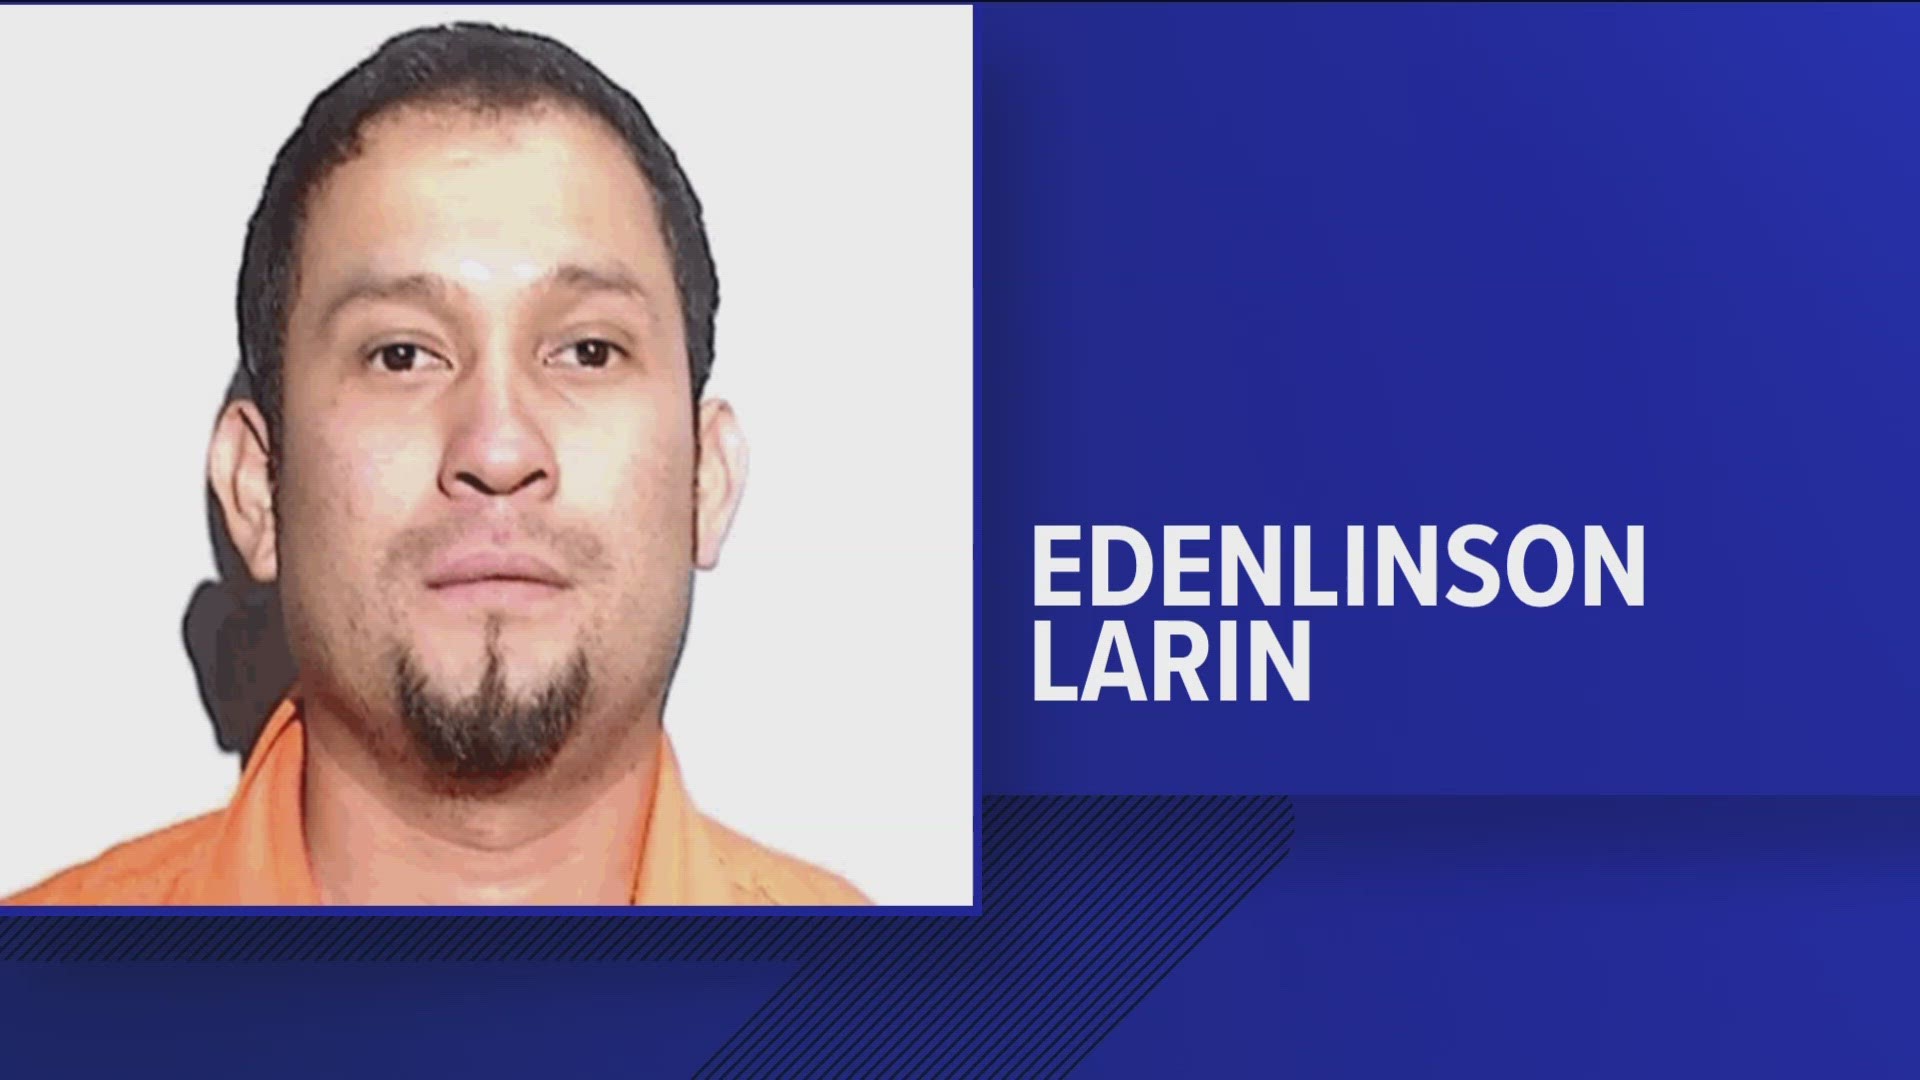 Edenilson Velasquez Larin, 33, was charged by a federal court in Brooklyn on June 21 after a 48-count superseding indictment was unsealed.